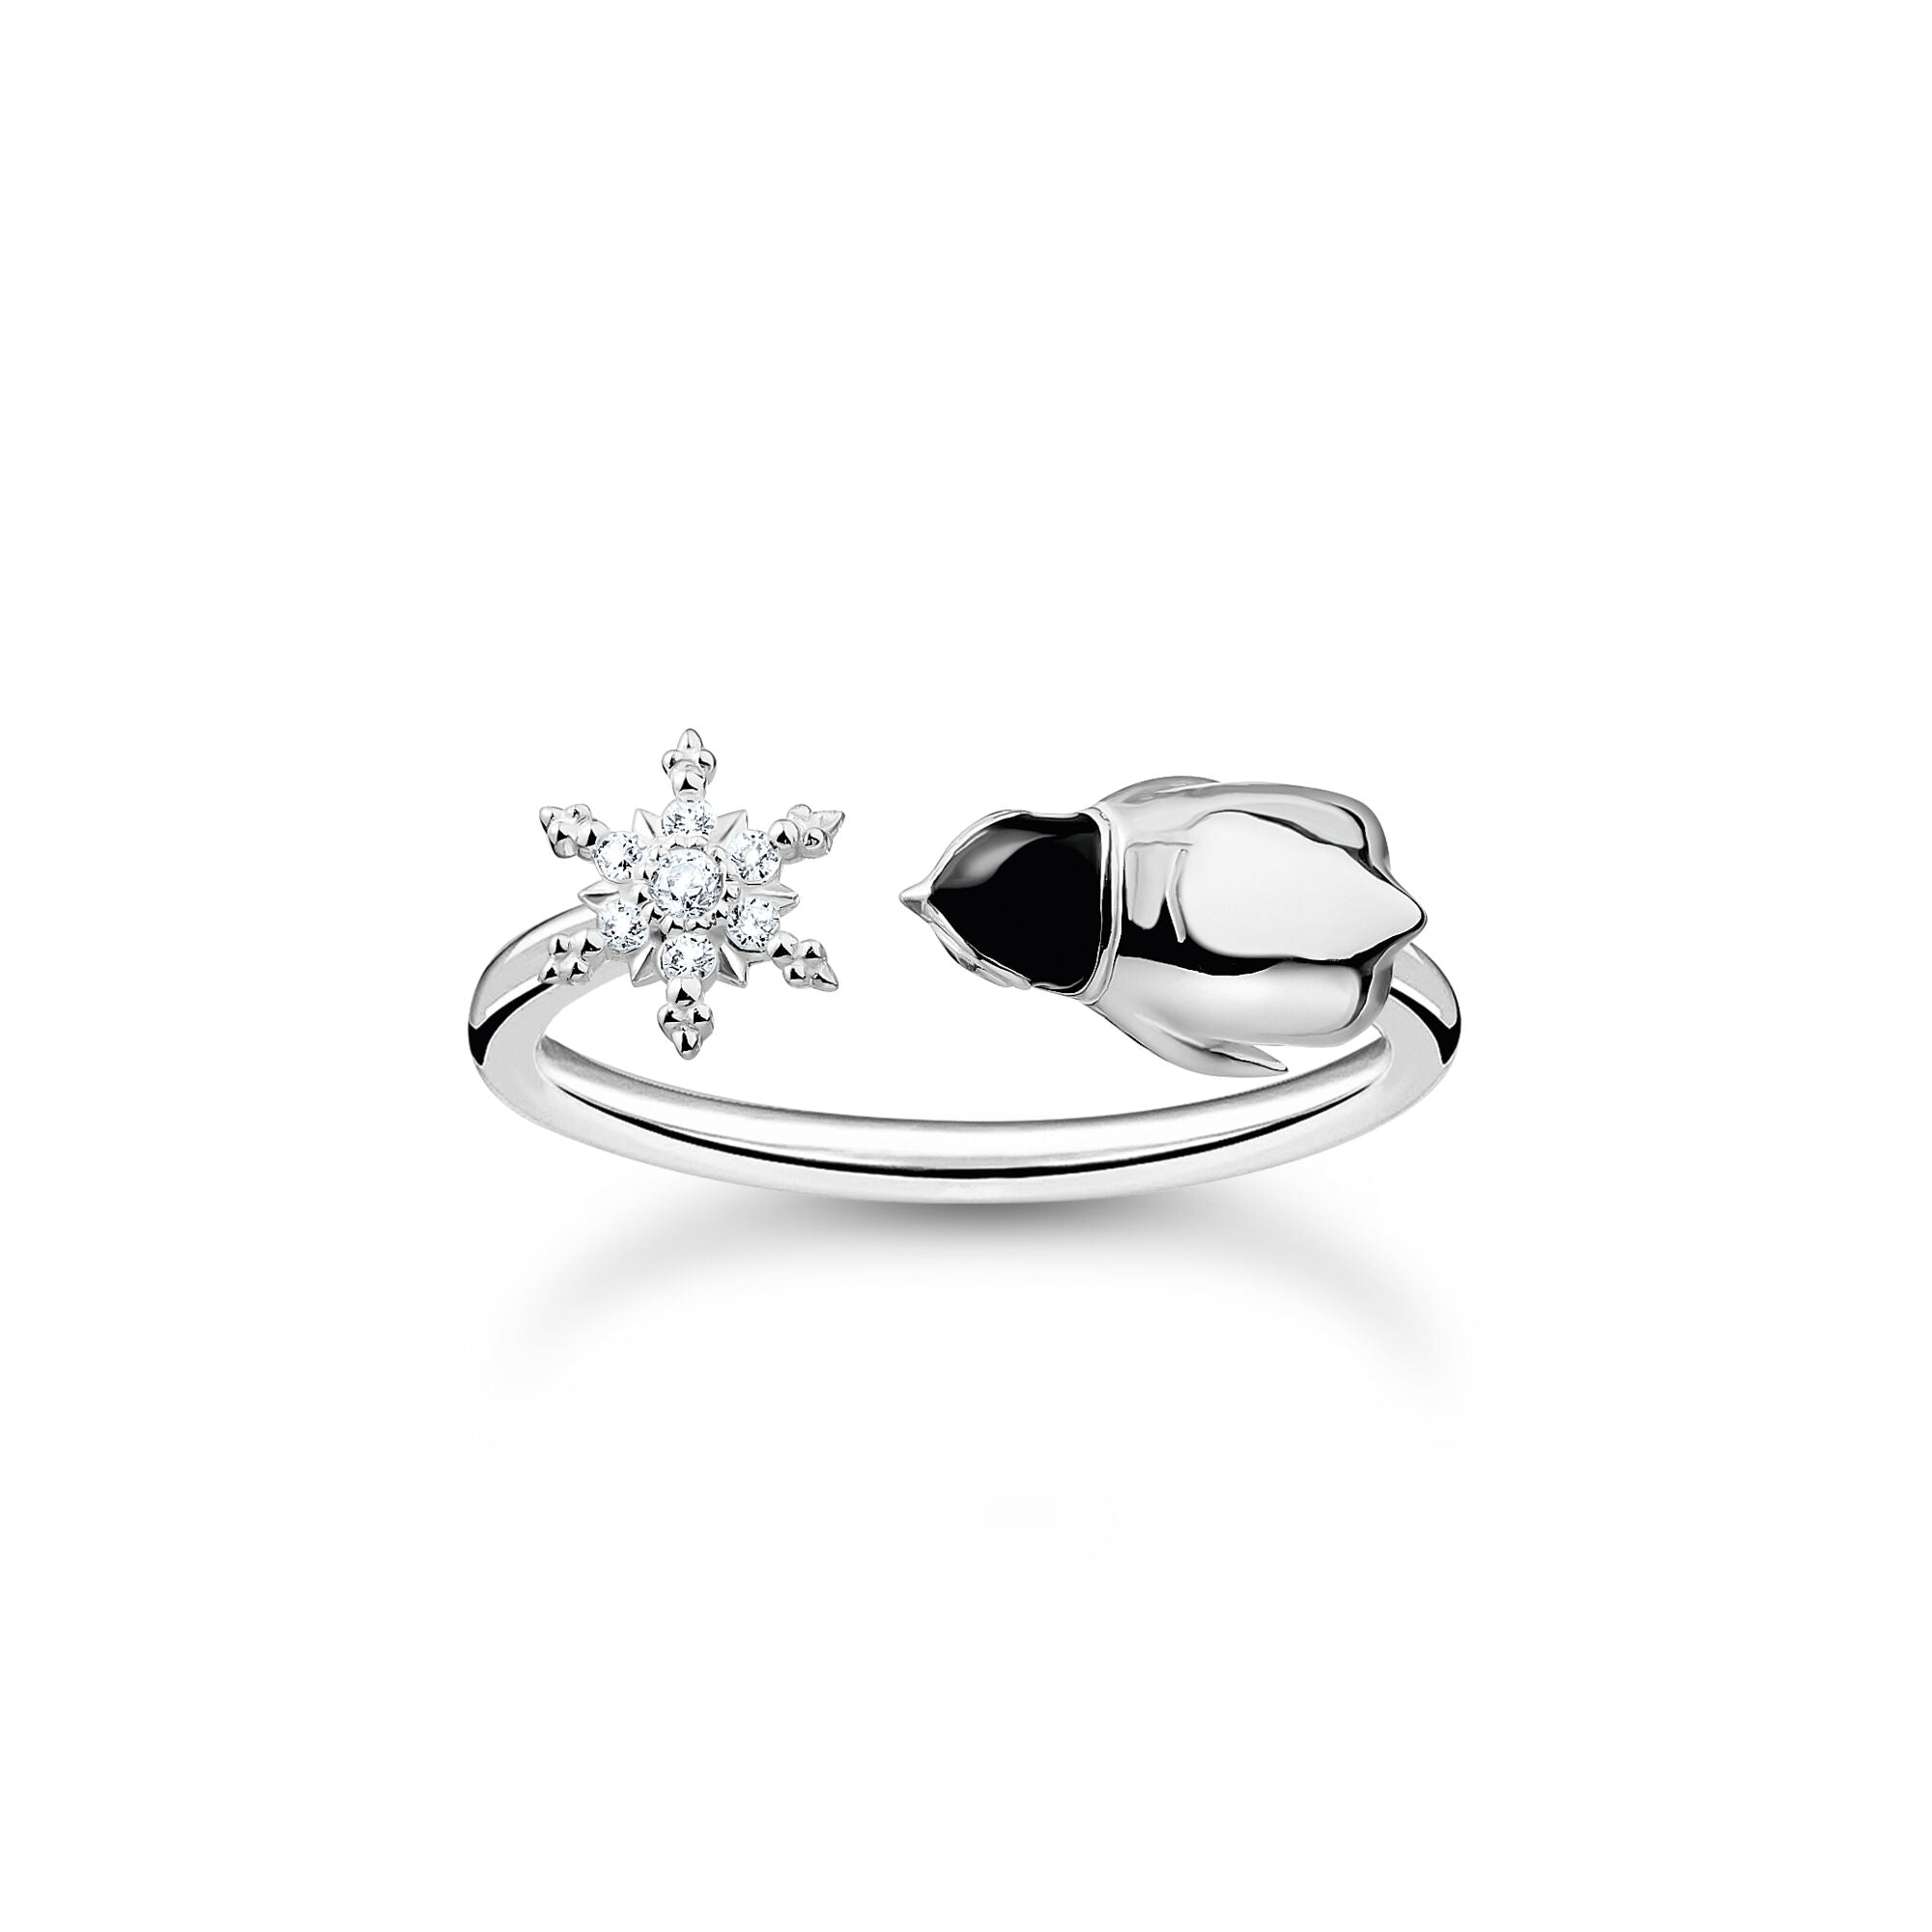 Thomas Sabo Charm Club Sterling Silver Snowflakes and Penguin Ring D